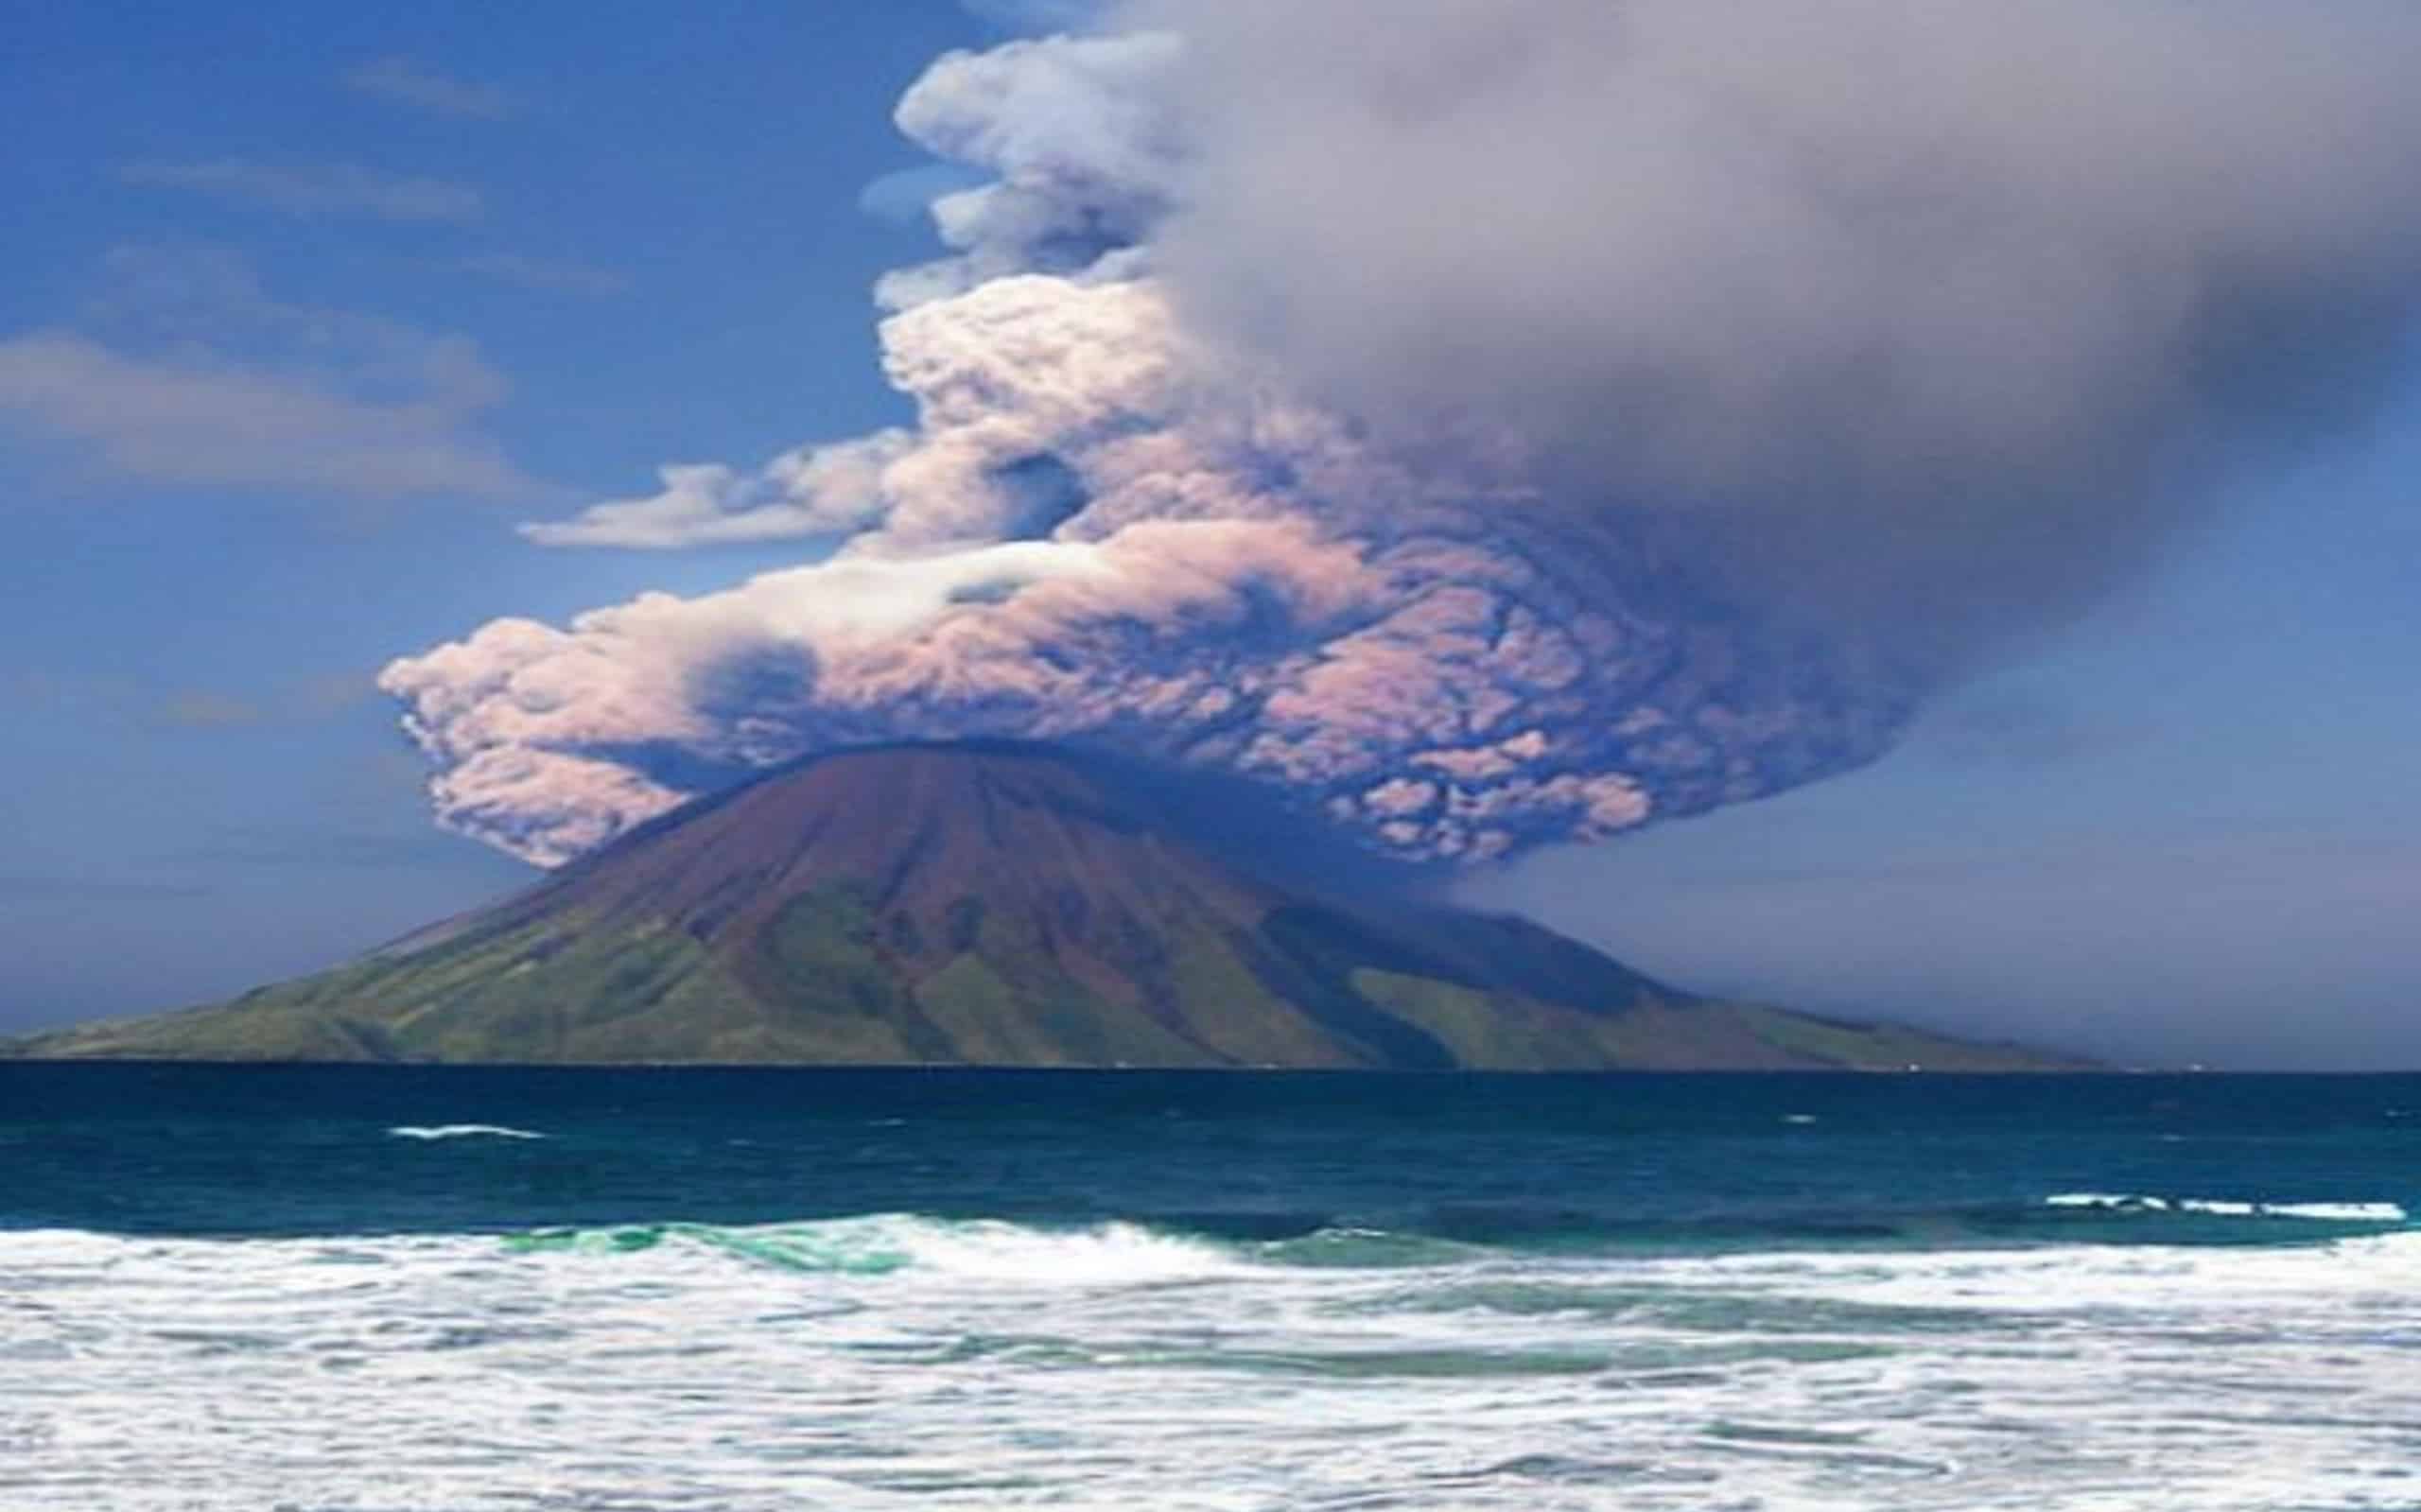 Paradise pacific island with erupting volcano